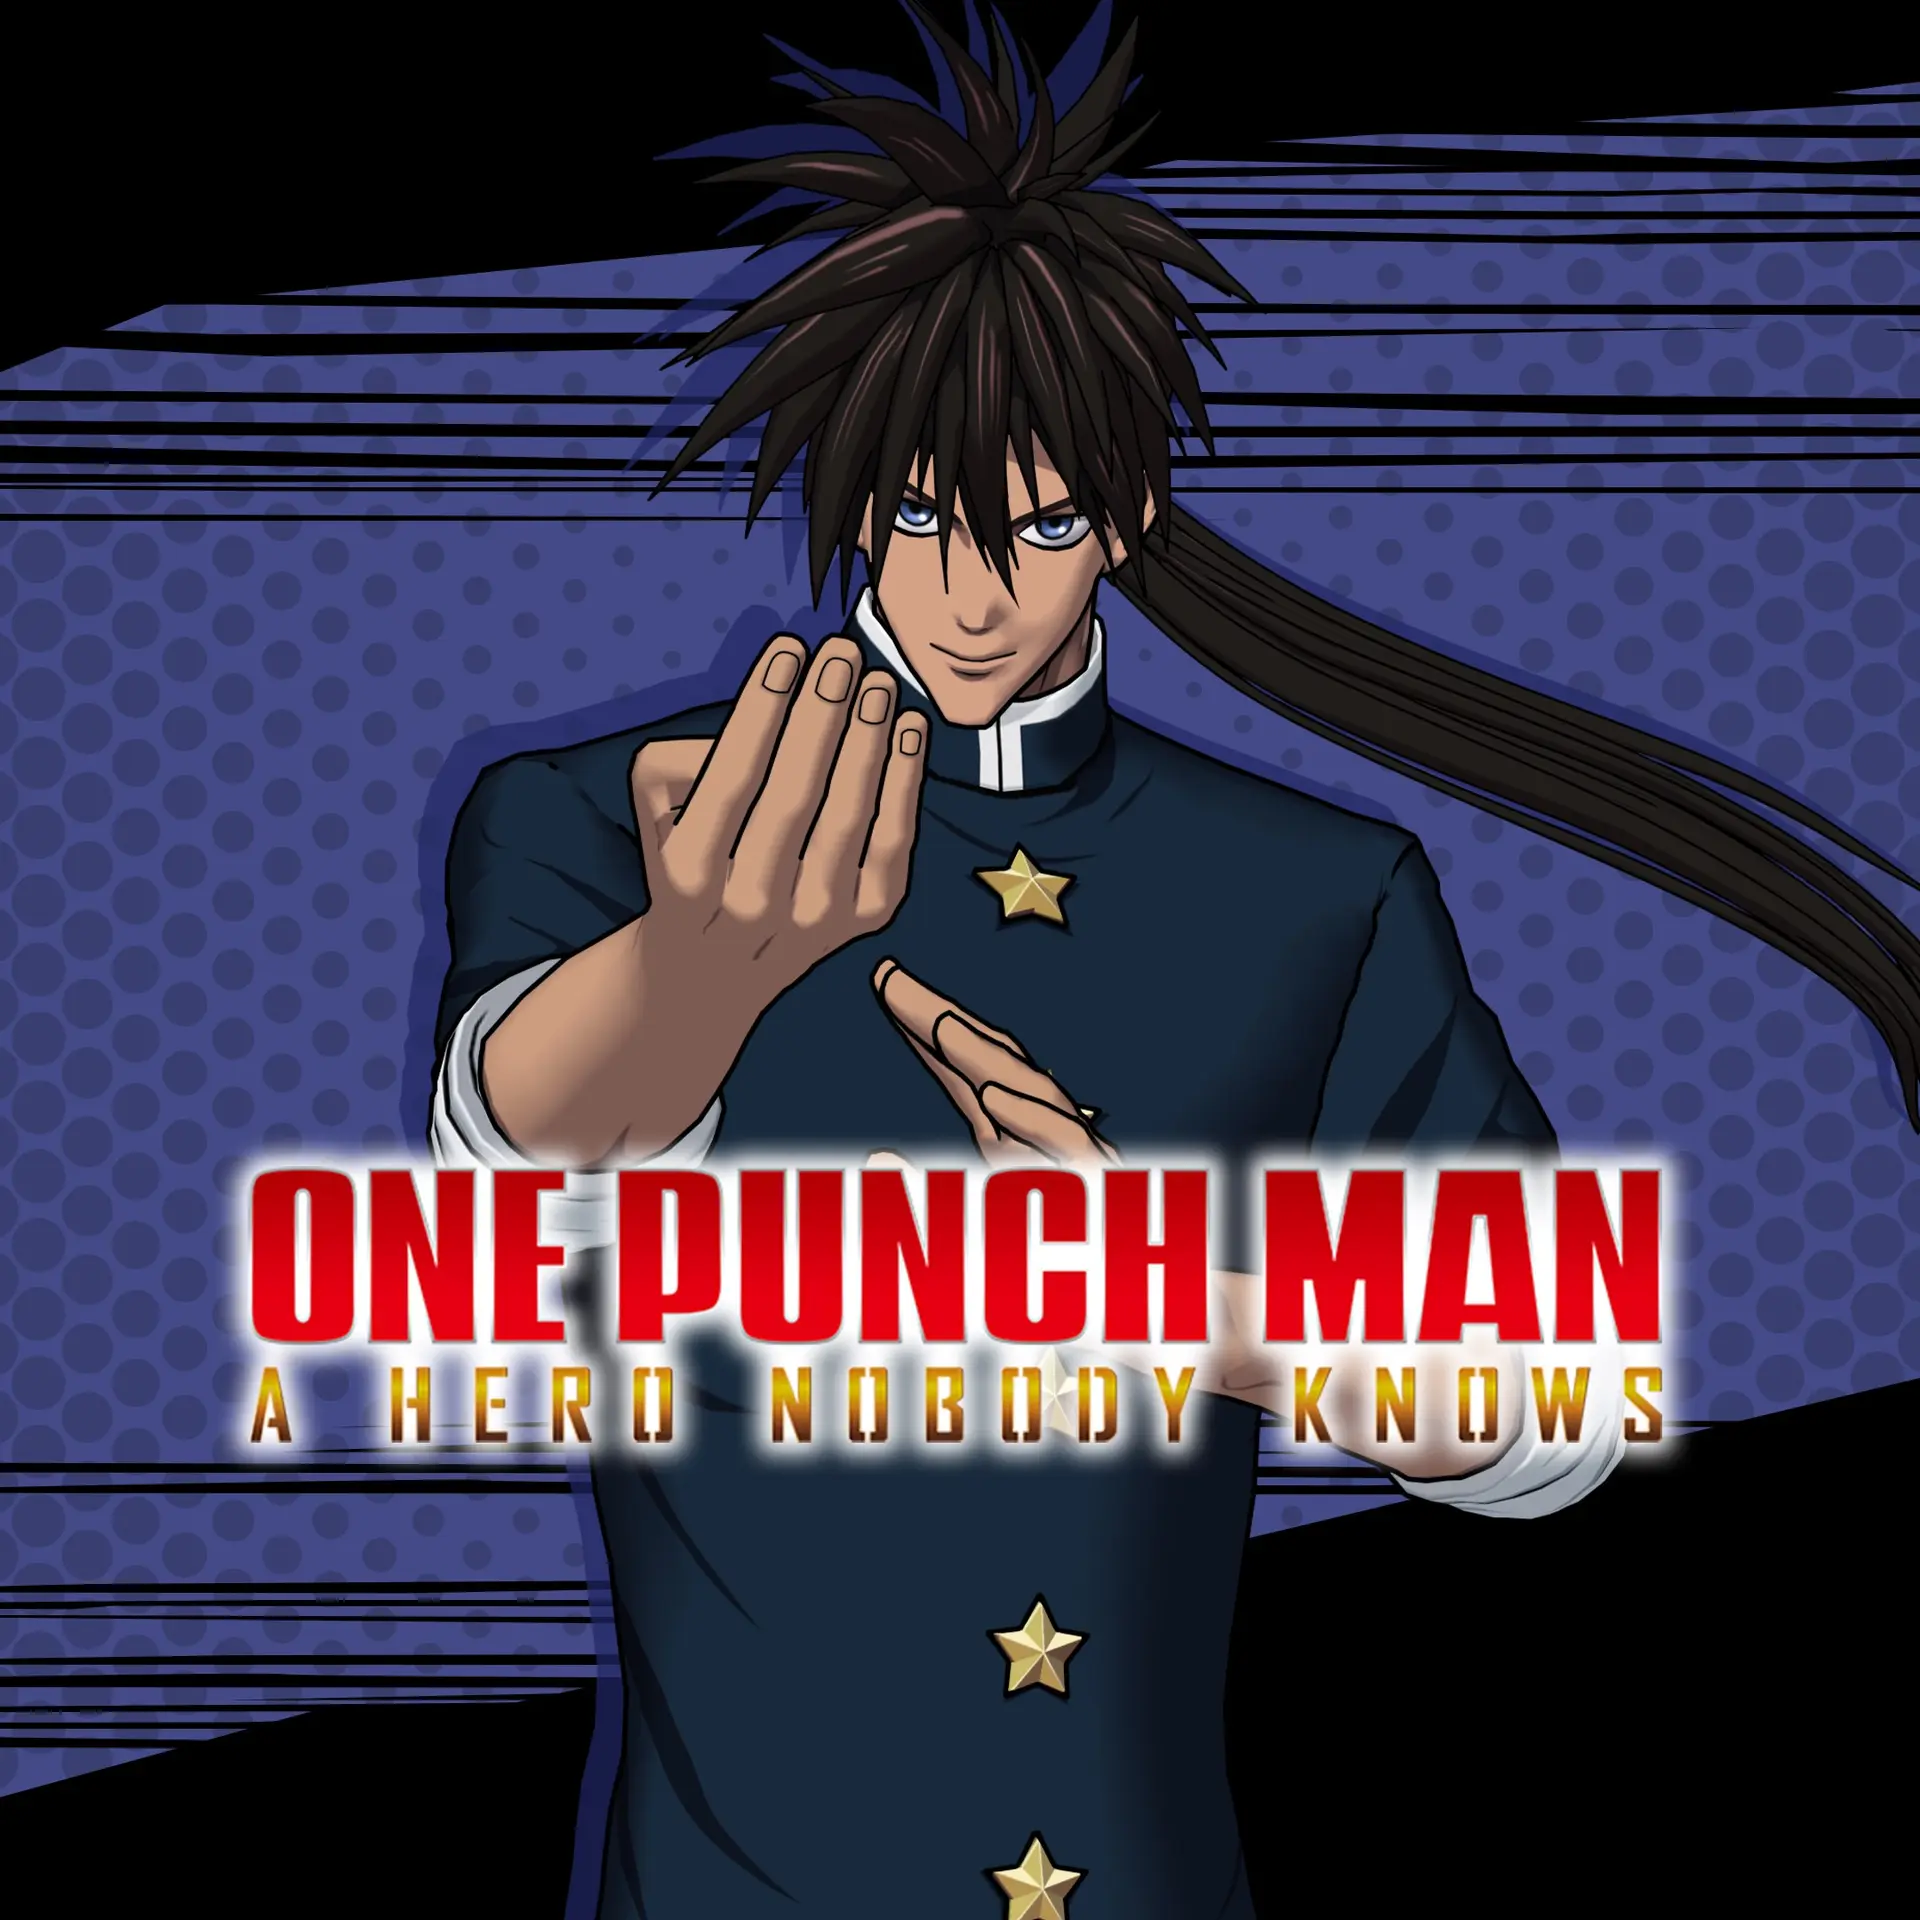 ONE PUNCH MAN: A HERO NOBODY KNOWS DLC Pack 1: Suiryu (Xbox Games BR)